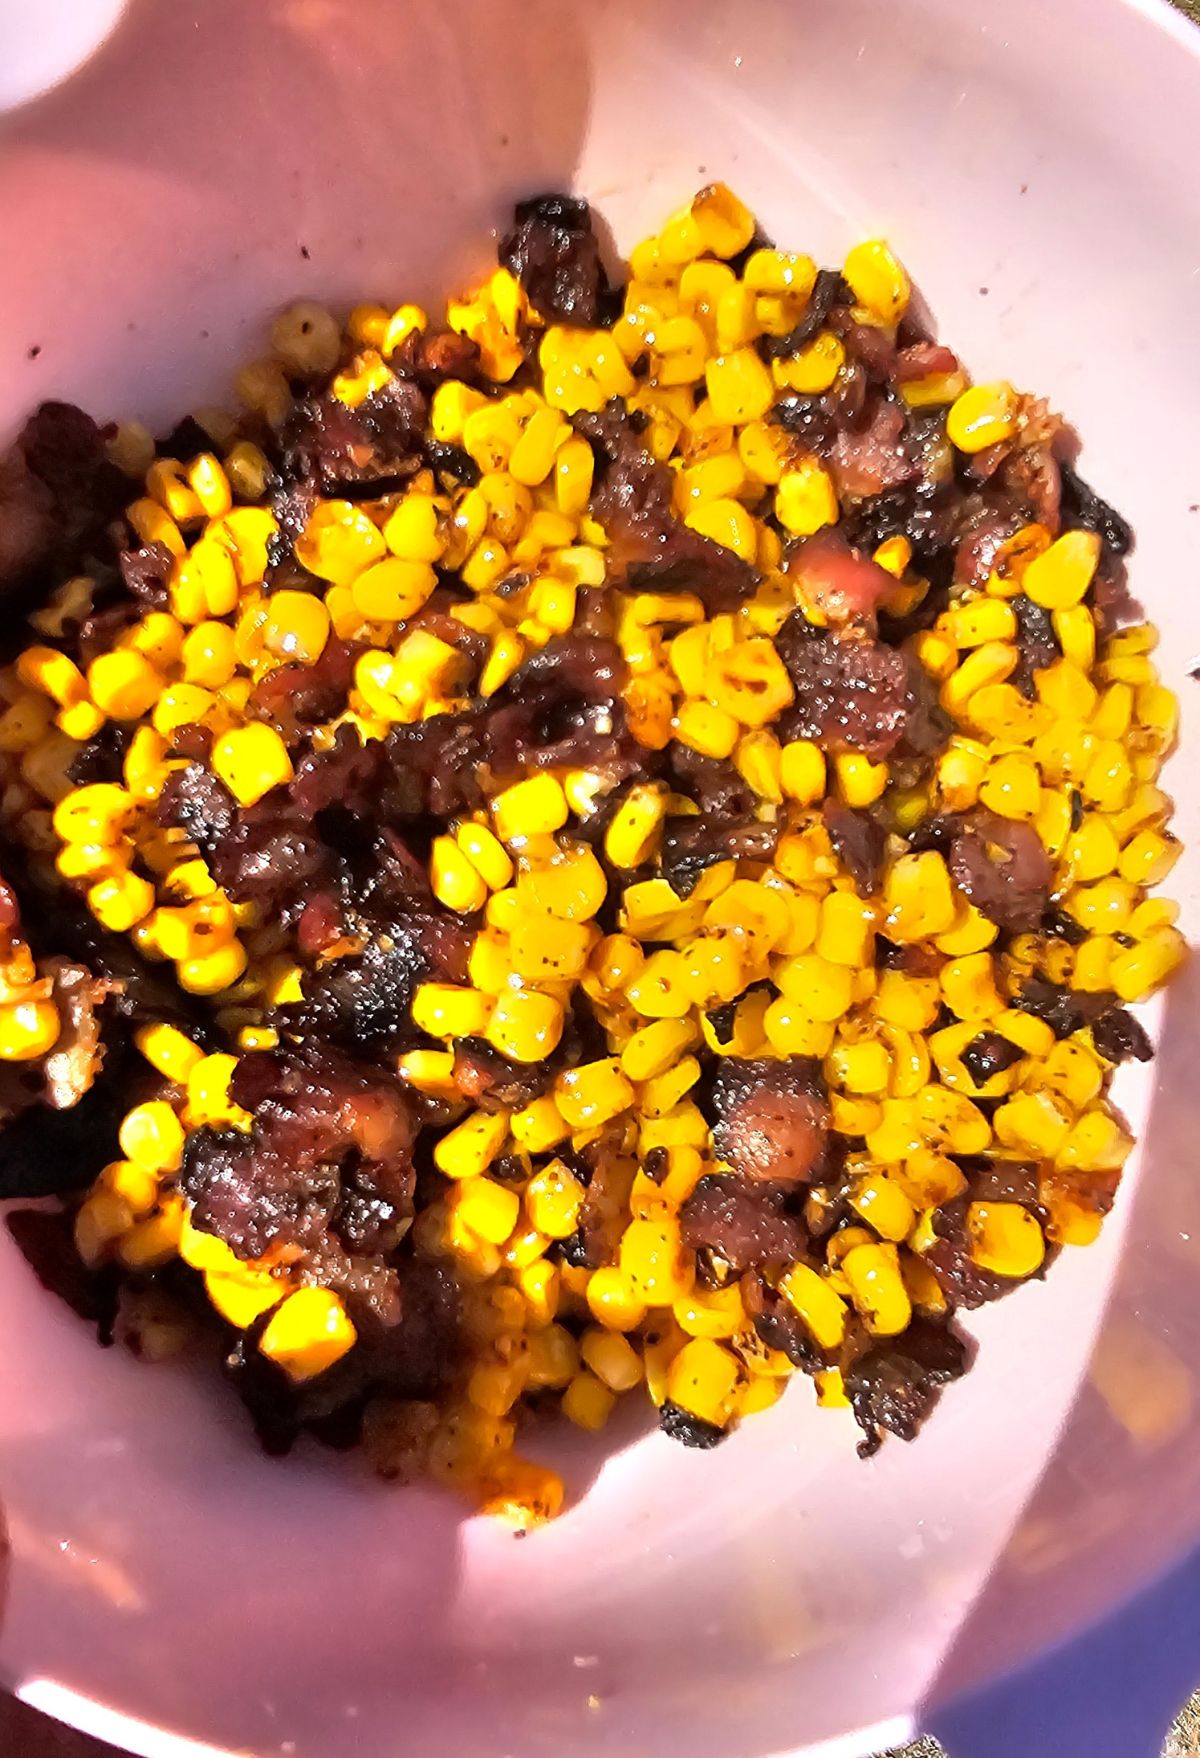 A bowl containing a mixture of corn and charred pieces of food.